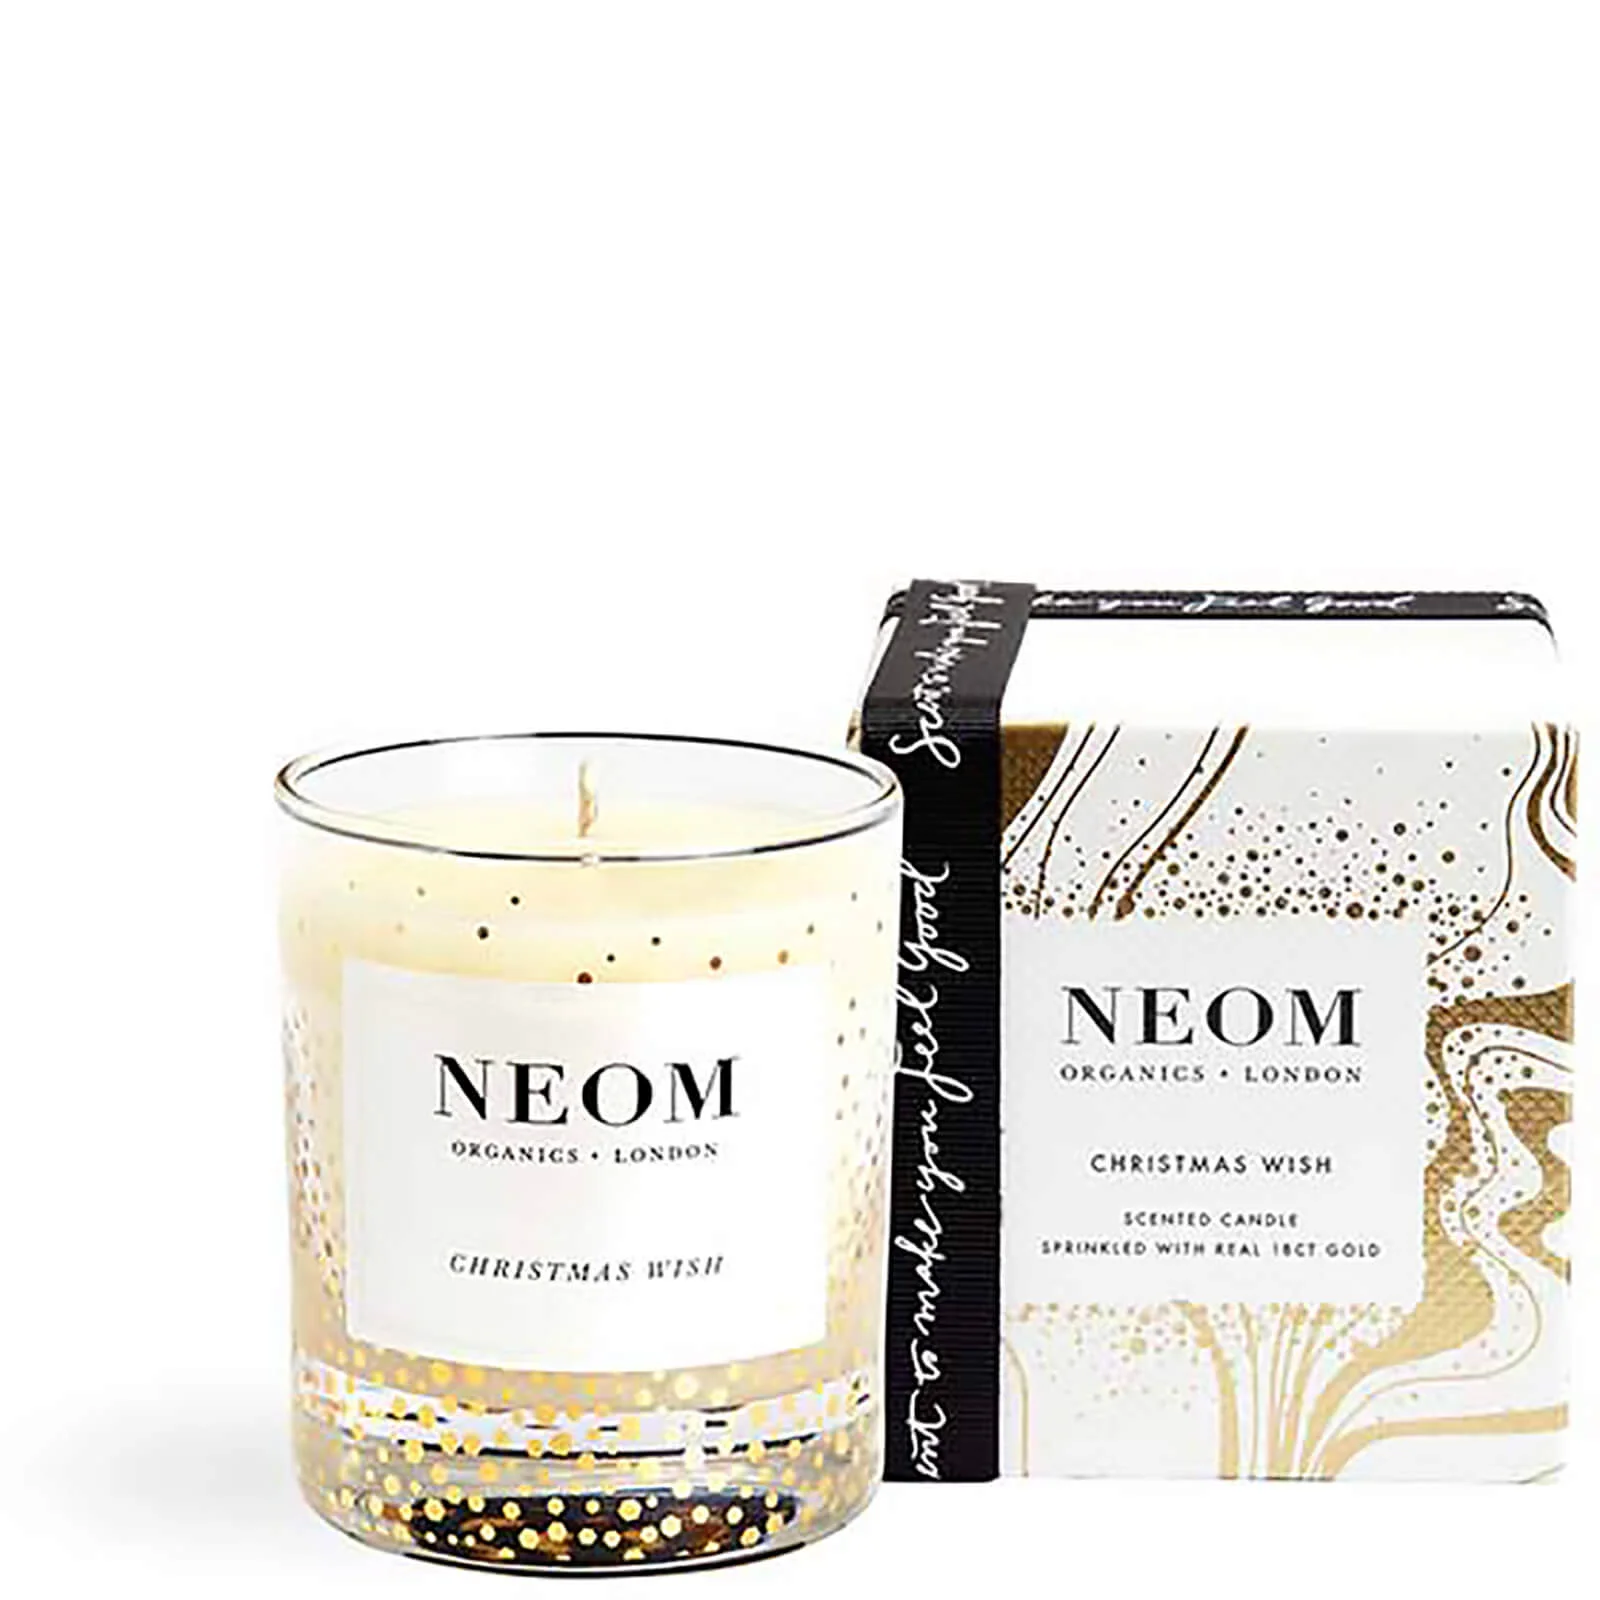 NEOM Organics Scents of Christmas Candle Collection Image 1